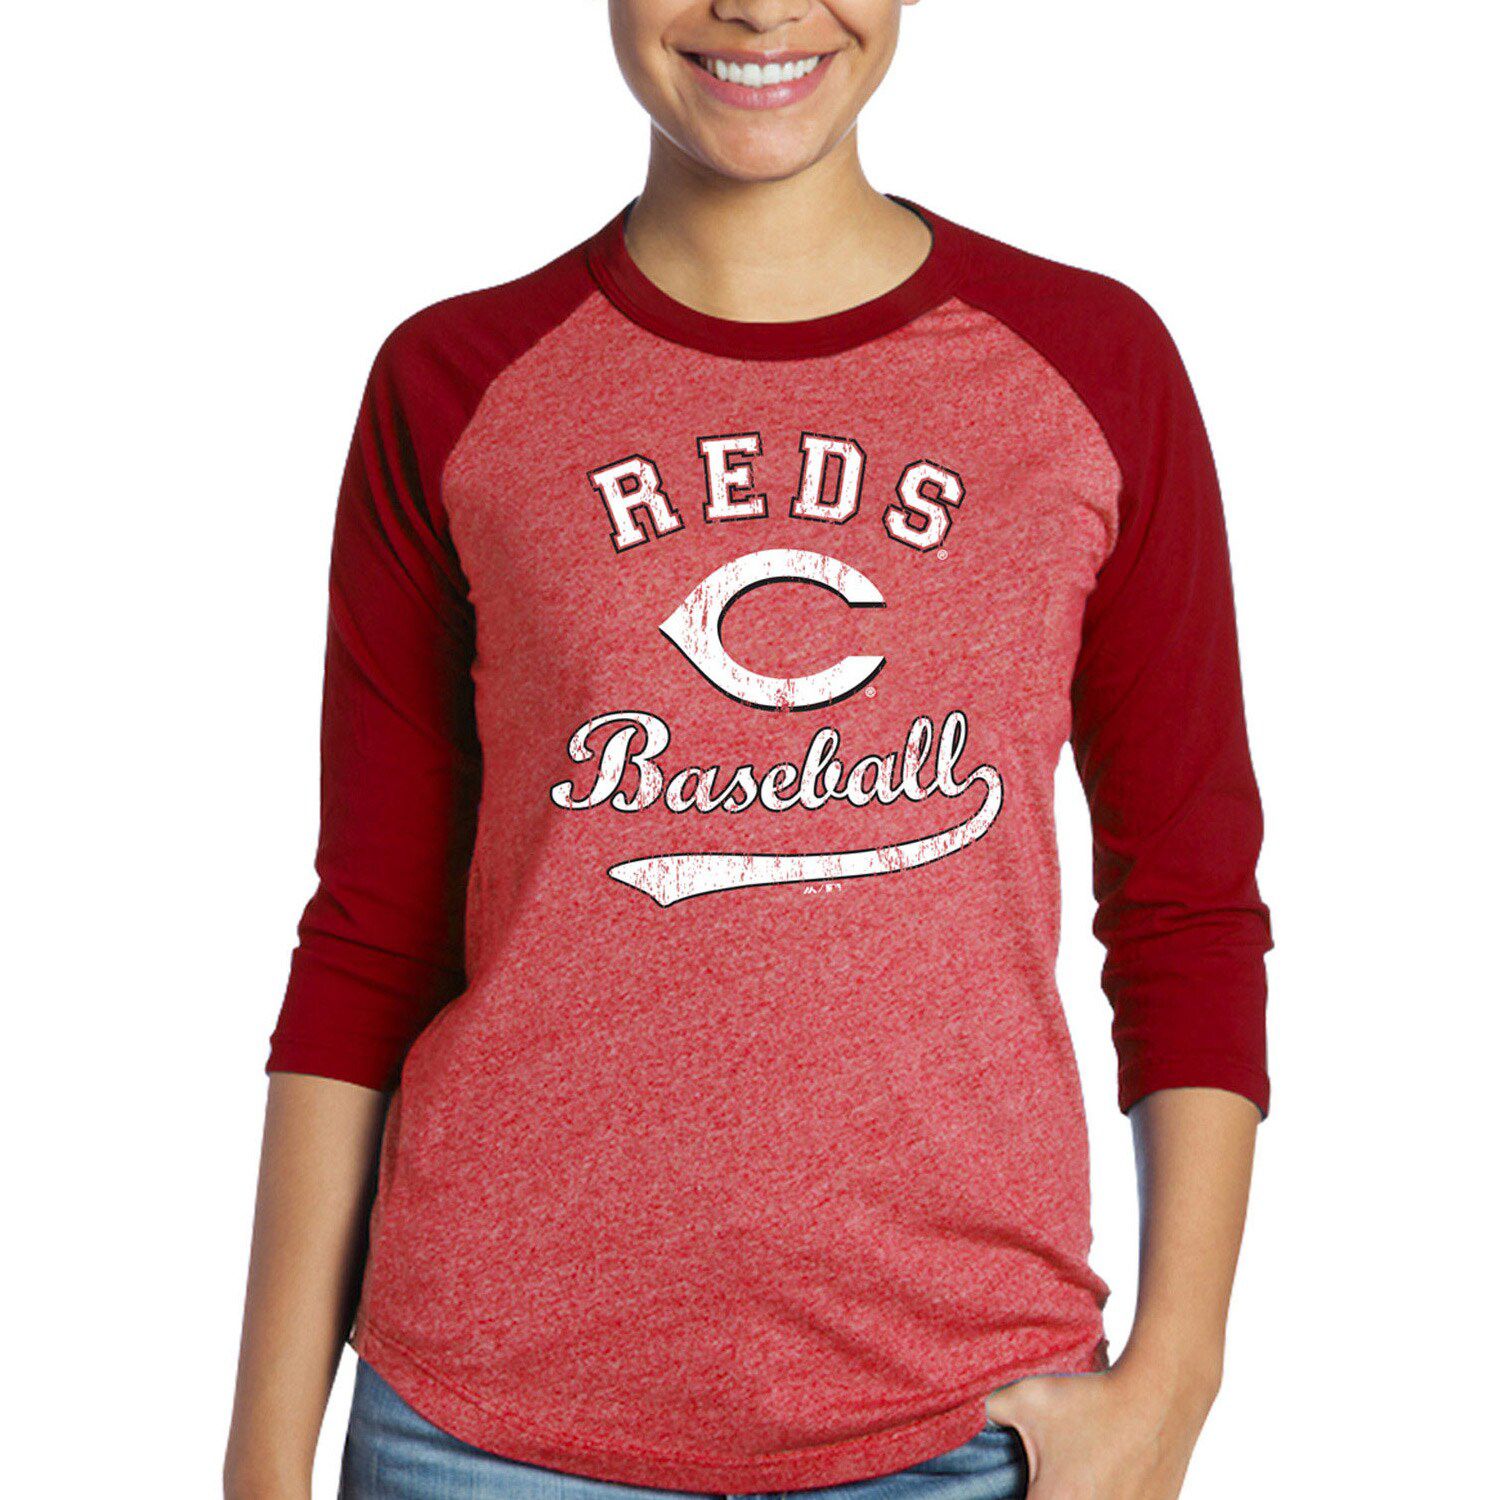 Cleveland Indians Soft as a Grape Women's Plus Sizes Three Out Color  Blocked Raglan Sleeve T-Shirt - Navy